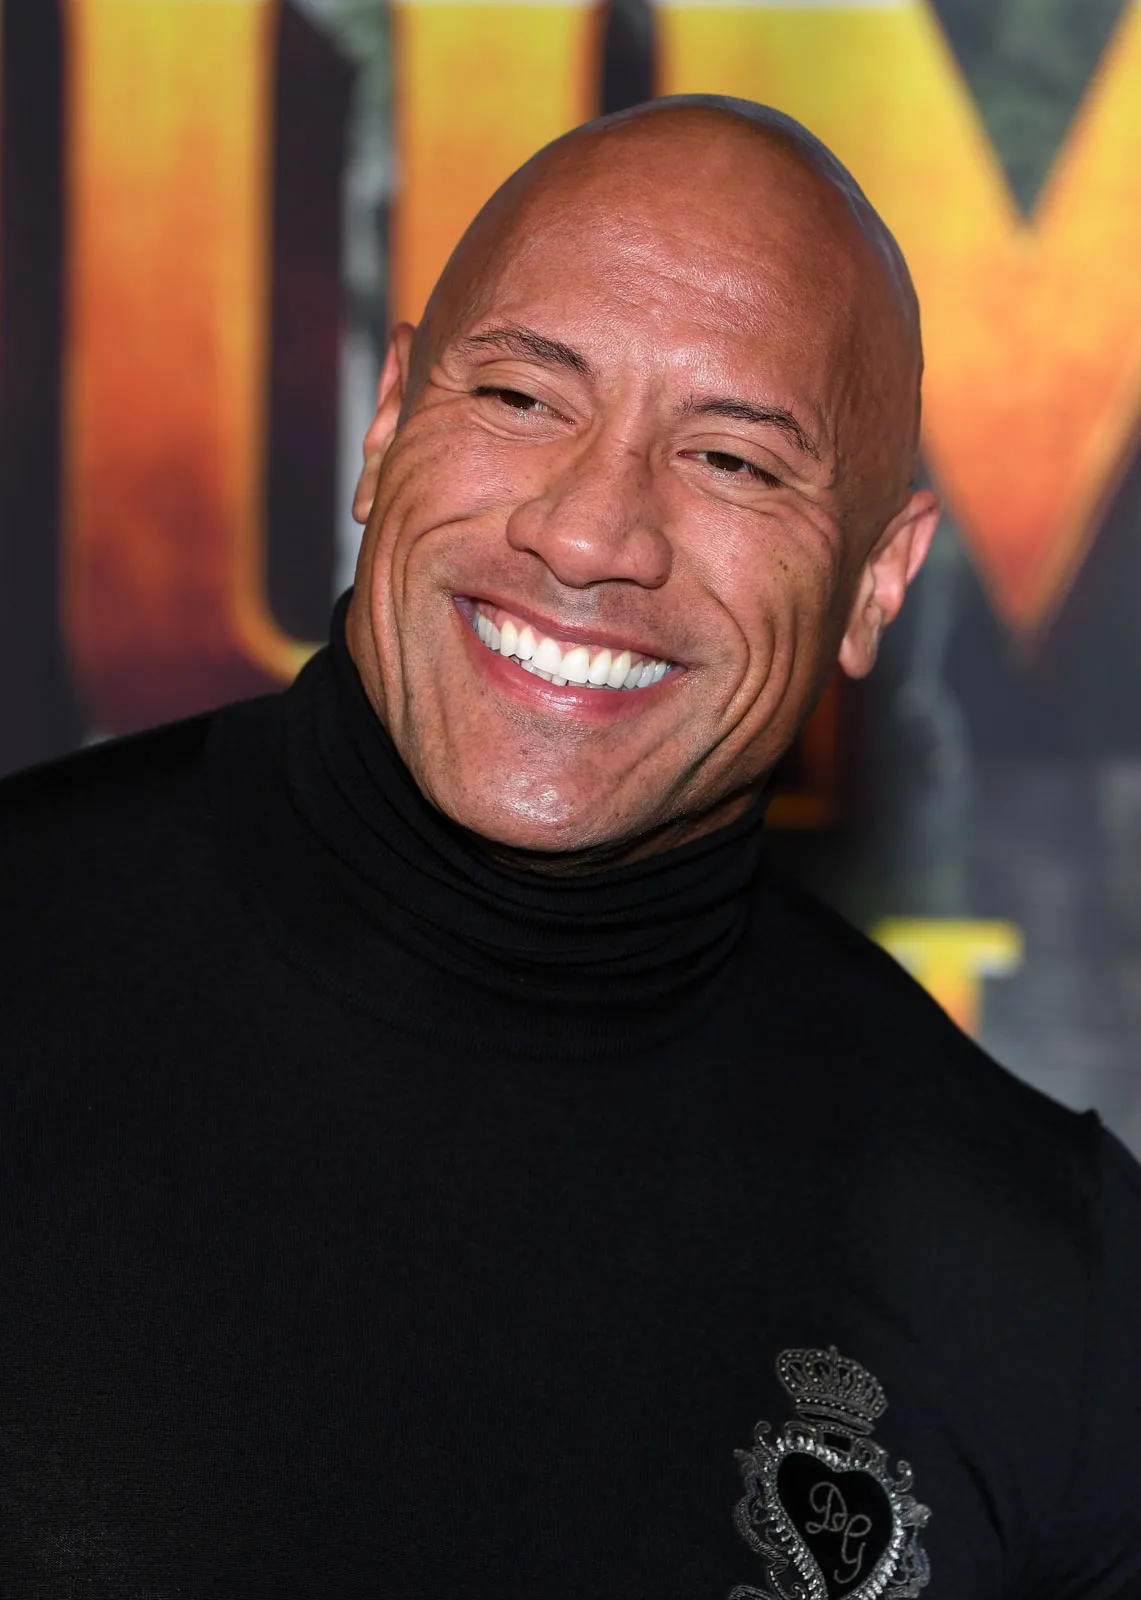 What is The Rock's famous eyebrow gesture called?